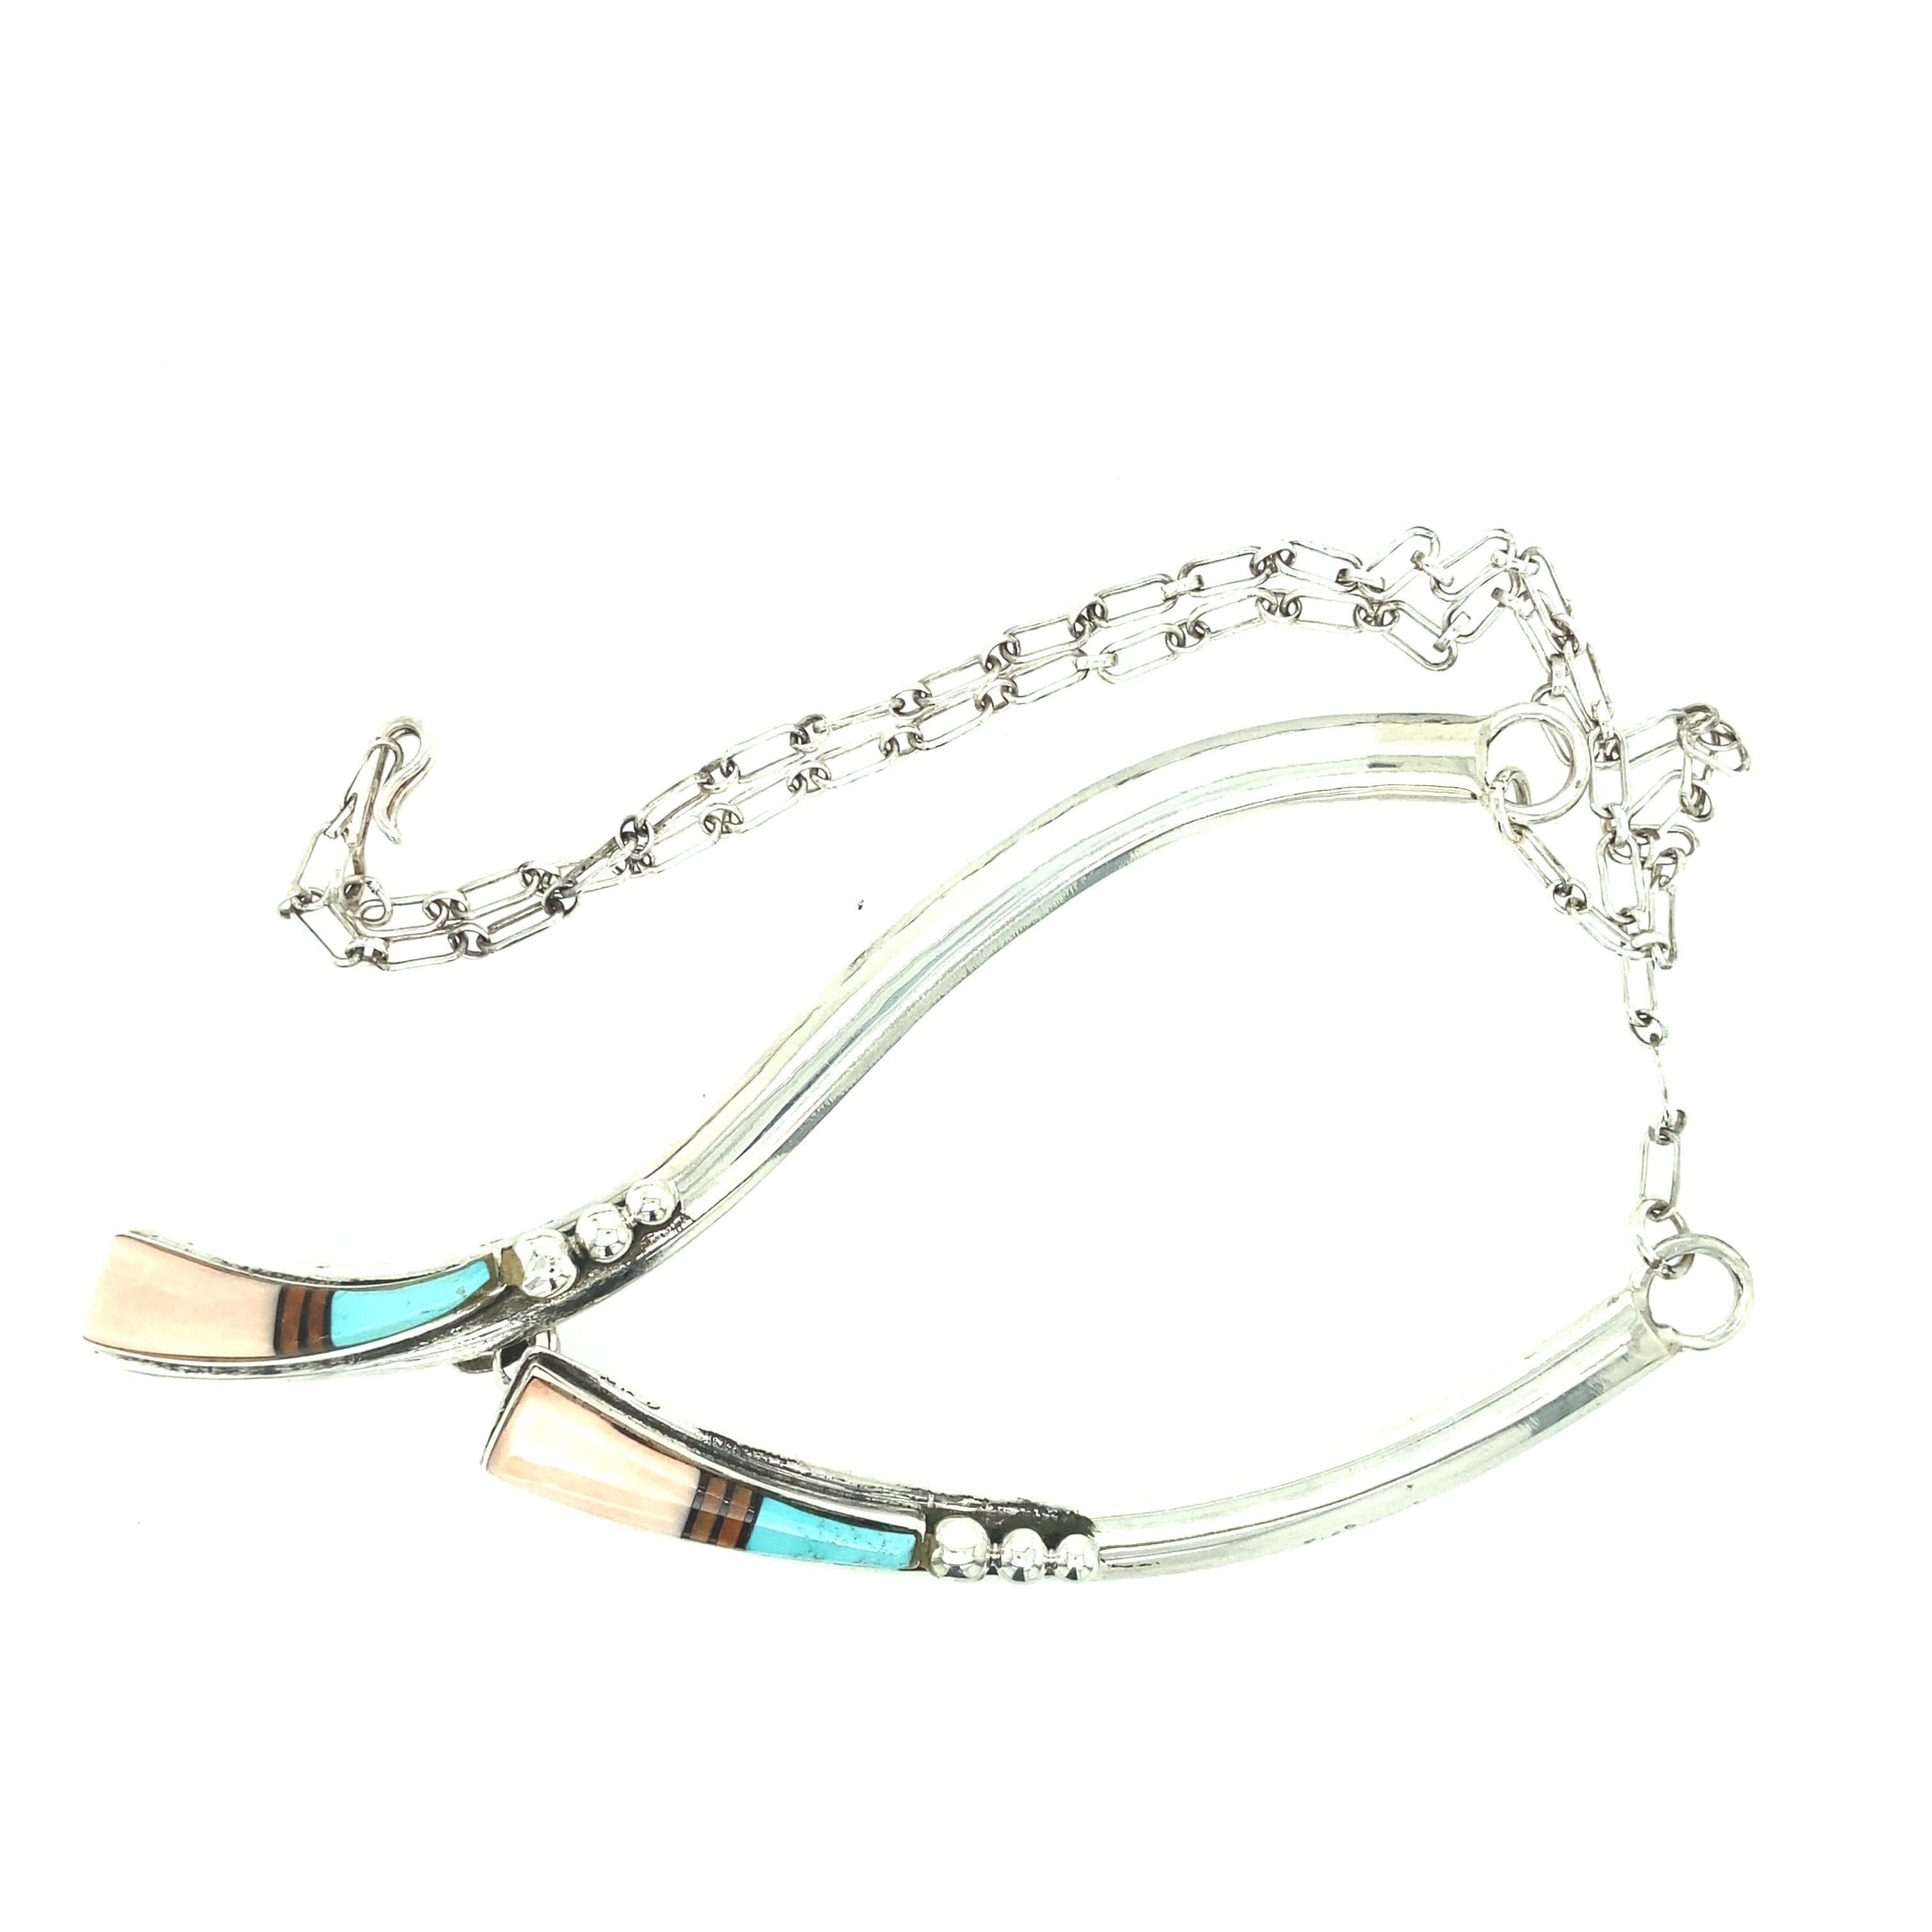 One sterling silver stamped (J. CHARLEY STERLING) John Charley Navajo necklace set with coral and turquoise inlay suspended from a link chain with hook and eye closure.  The necklace measures 19 inches in length.  